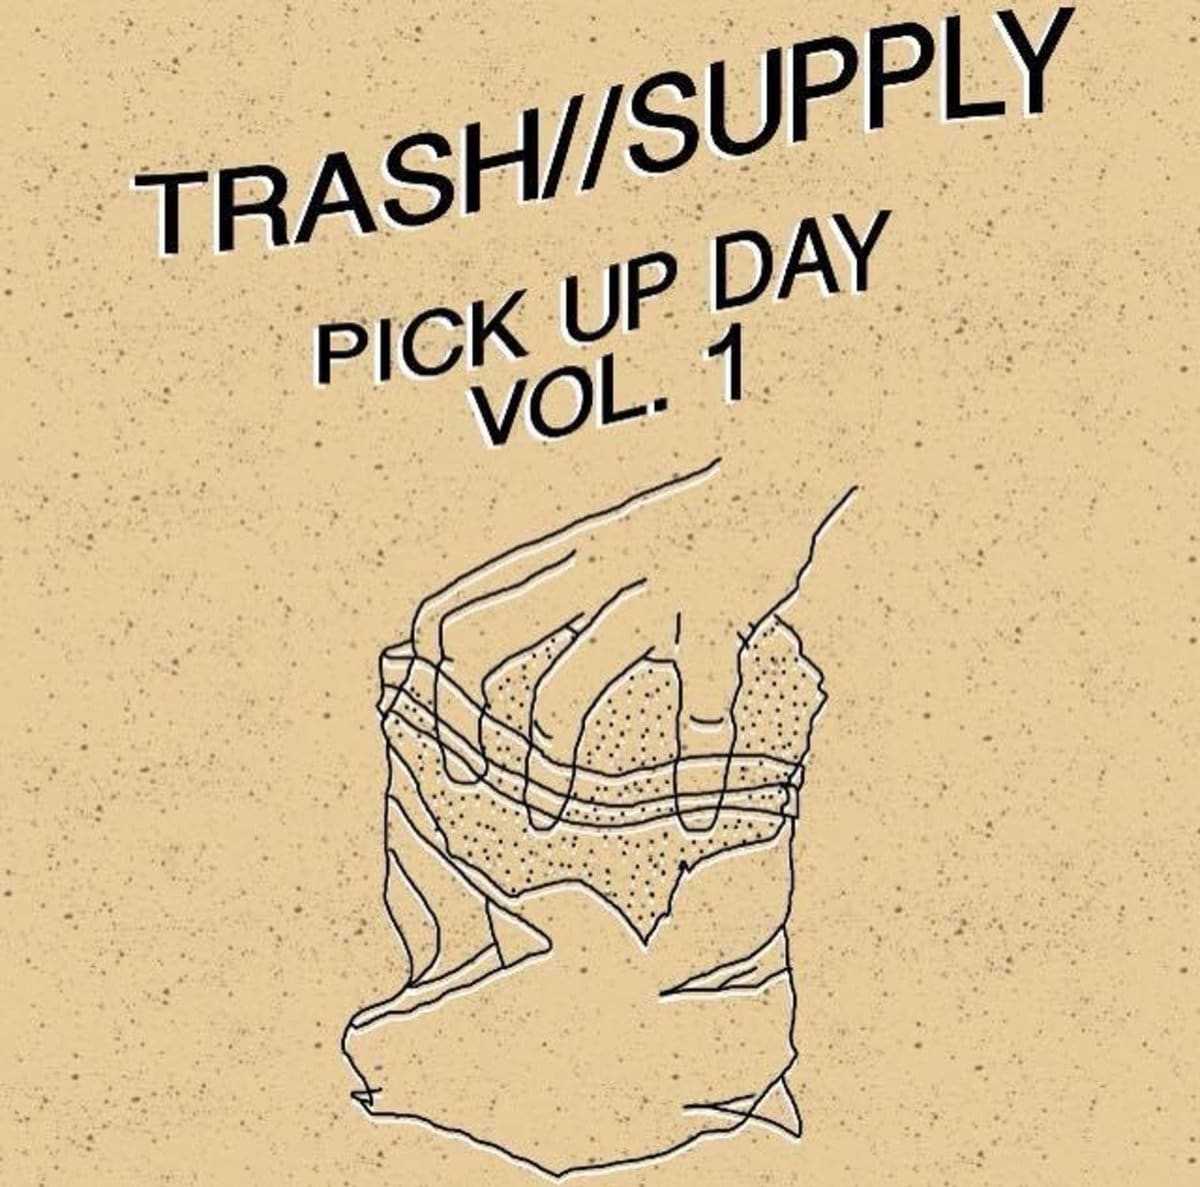 TRASH//SUPPLY - "PICK UP DAY VOL. 1" (Release)